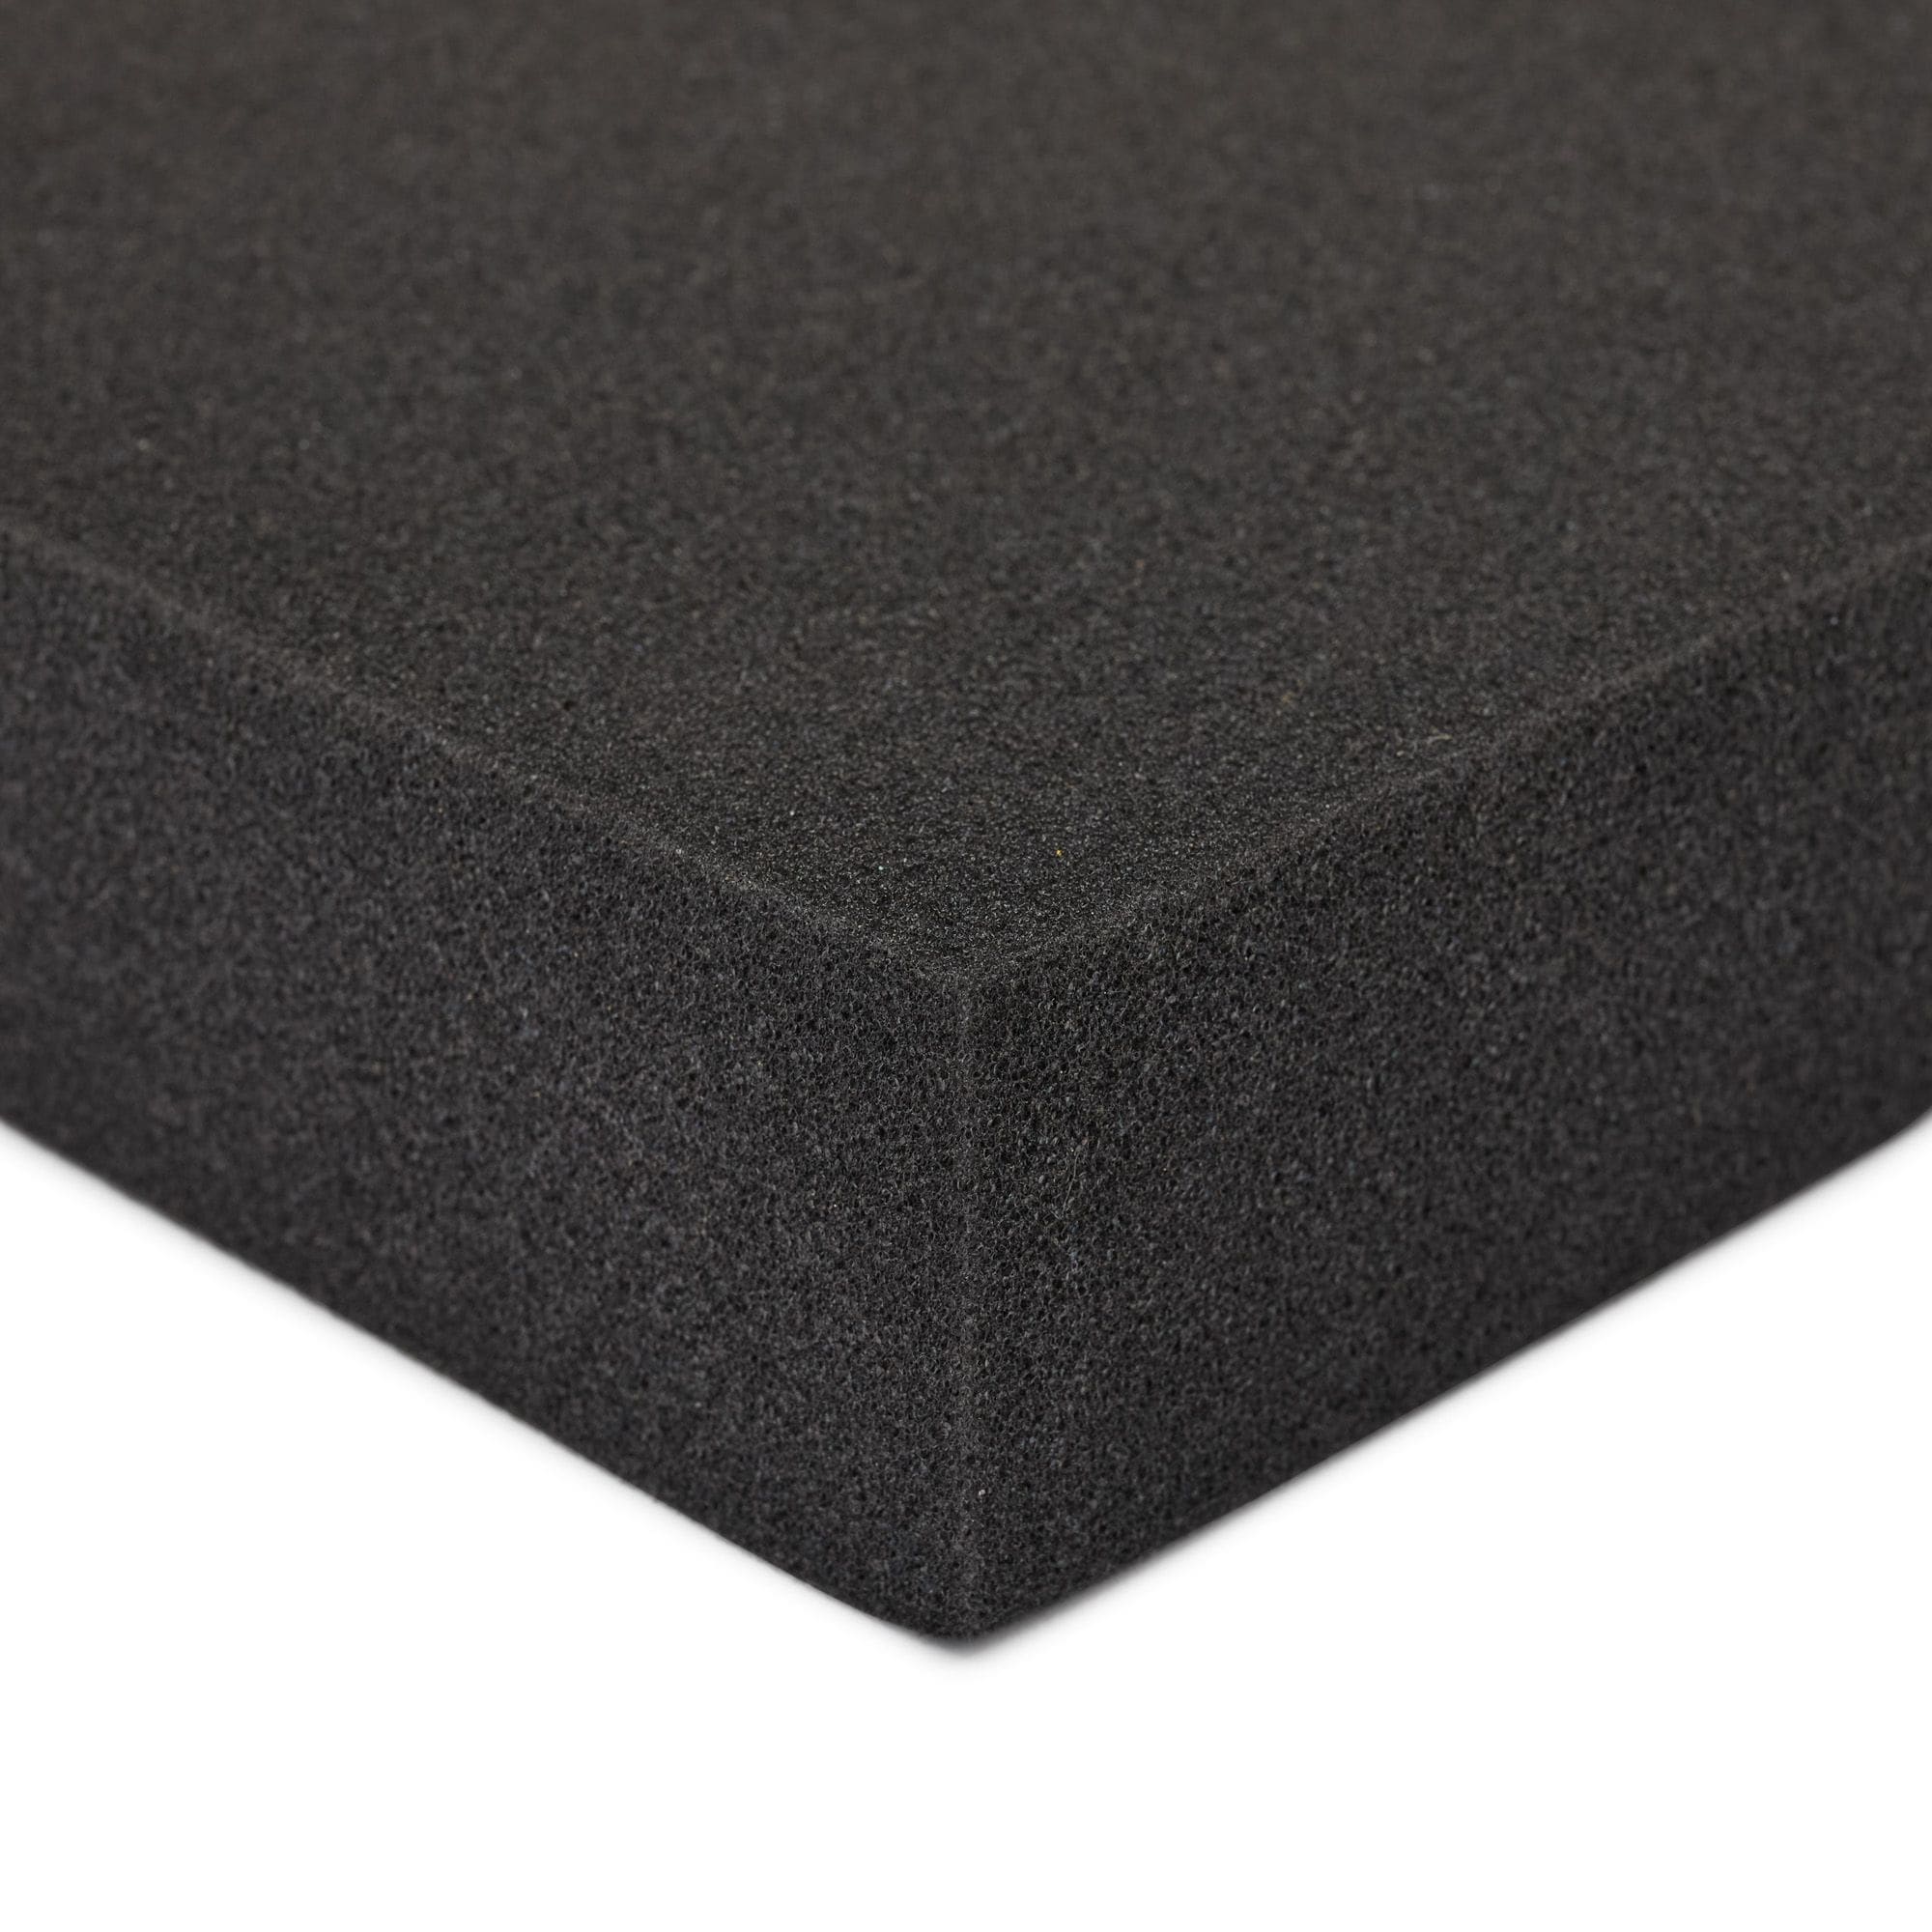 2 Pack Black Packing Foam Sheets, 2 inch Polyurethane Cushioning Inserts for Cases, Moving, 12 x 16 in